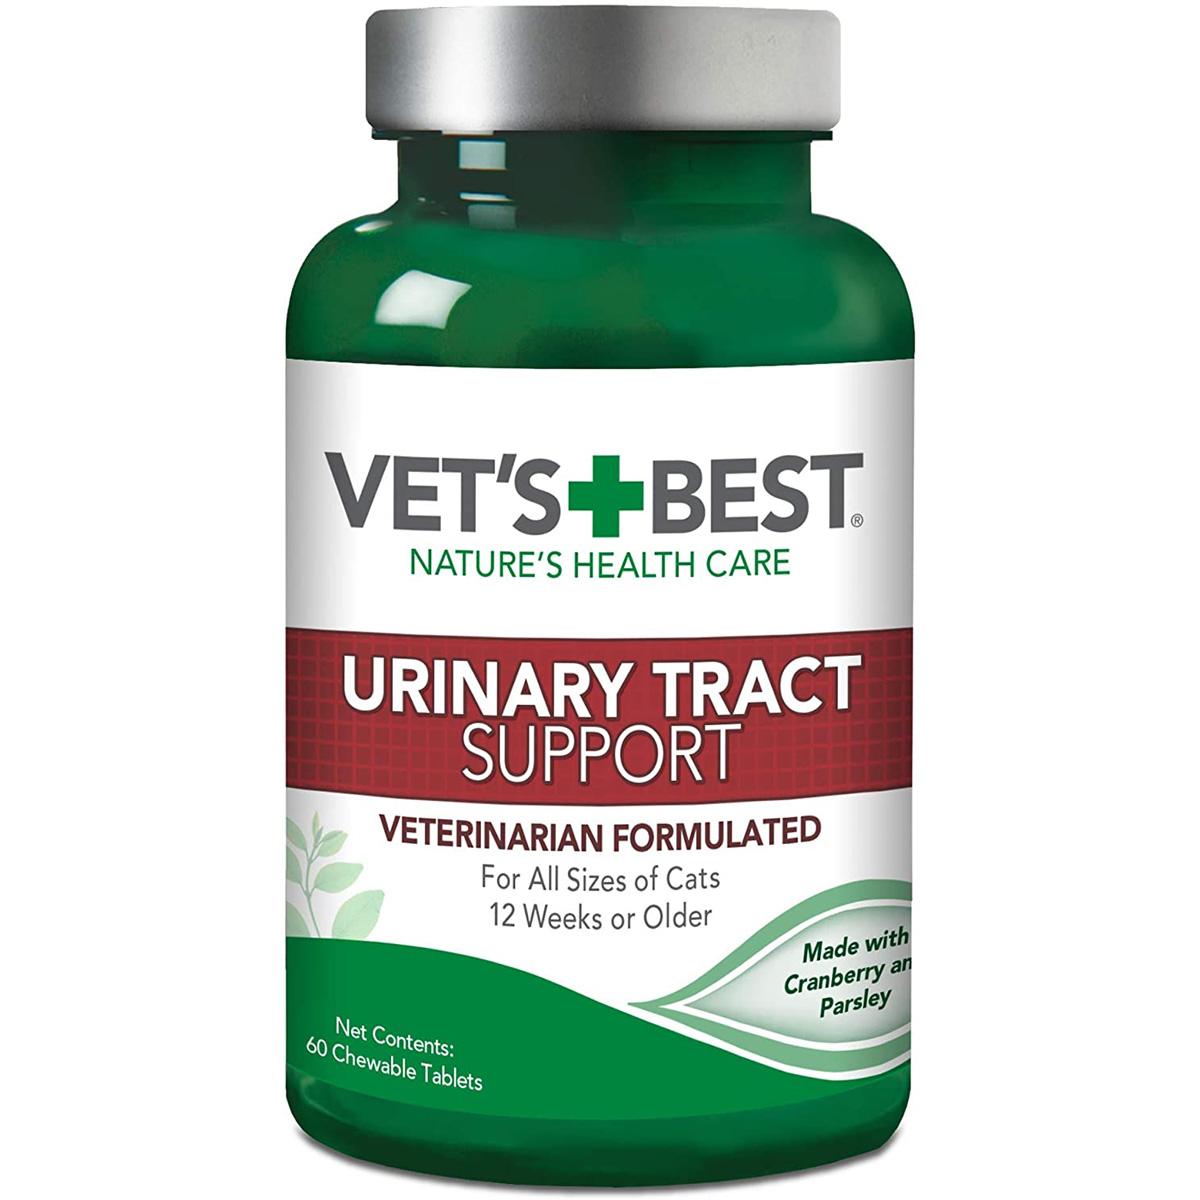 60 Vets Best Cat Urinary Tract Support Chewable Tablets for $1.05 Shipped